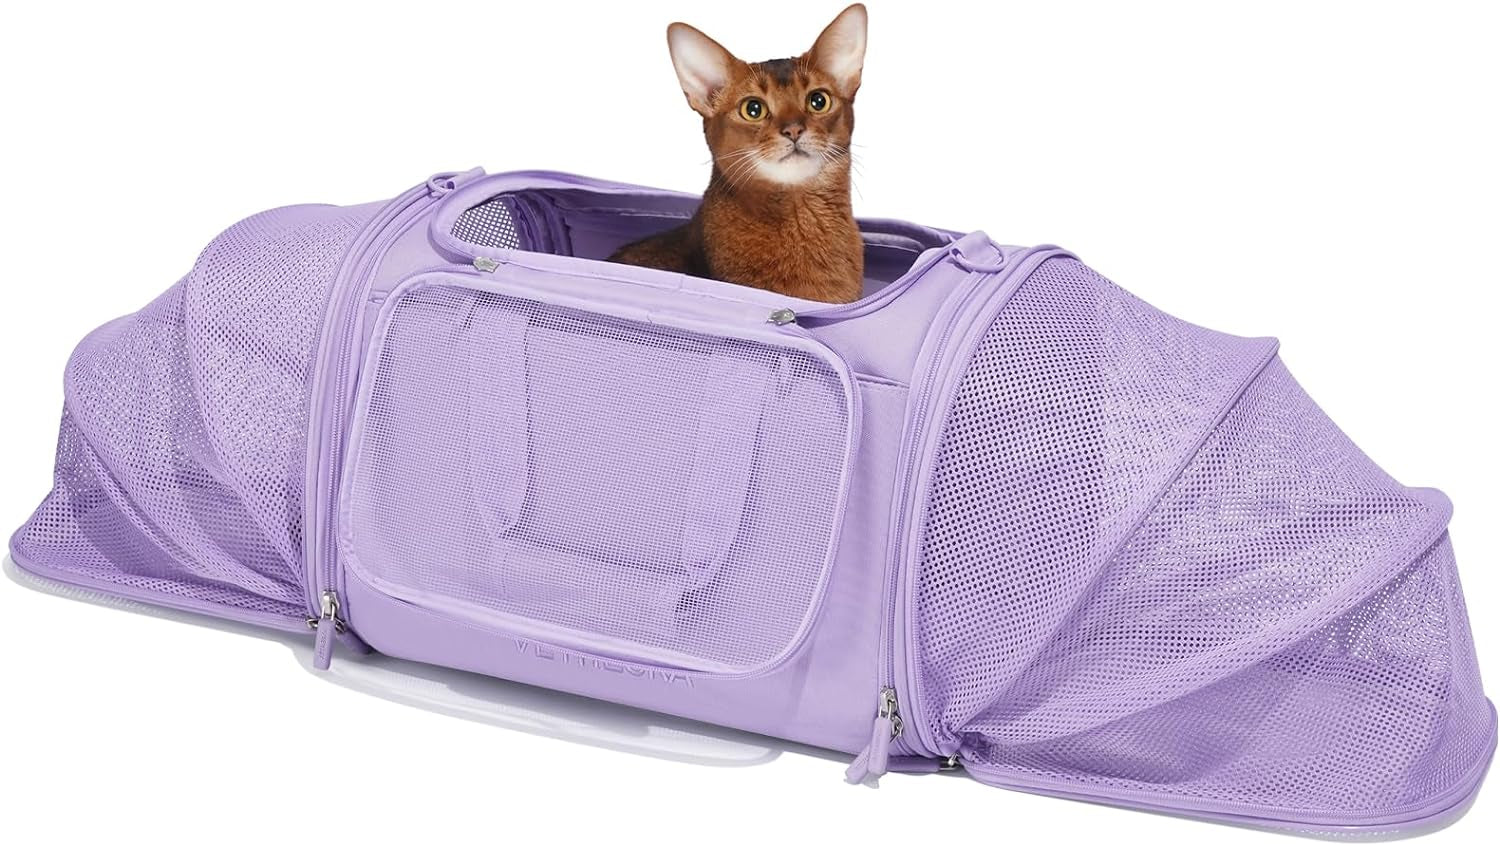 Expandable Soft-Sided Cat Carrier - Airline Approved, Collapsible Travel Carrier with Locking Safety Zippers and Anti-Scratch Mesh